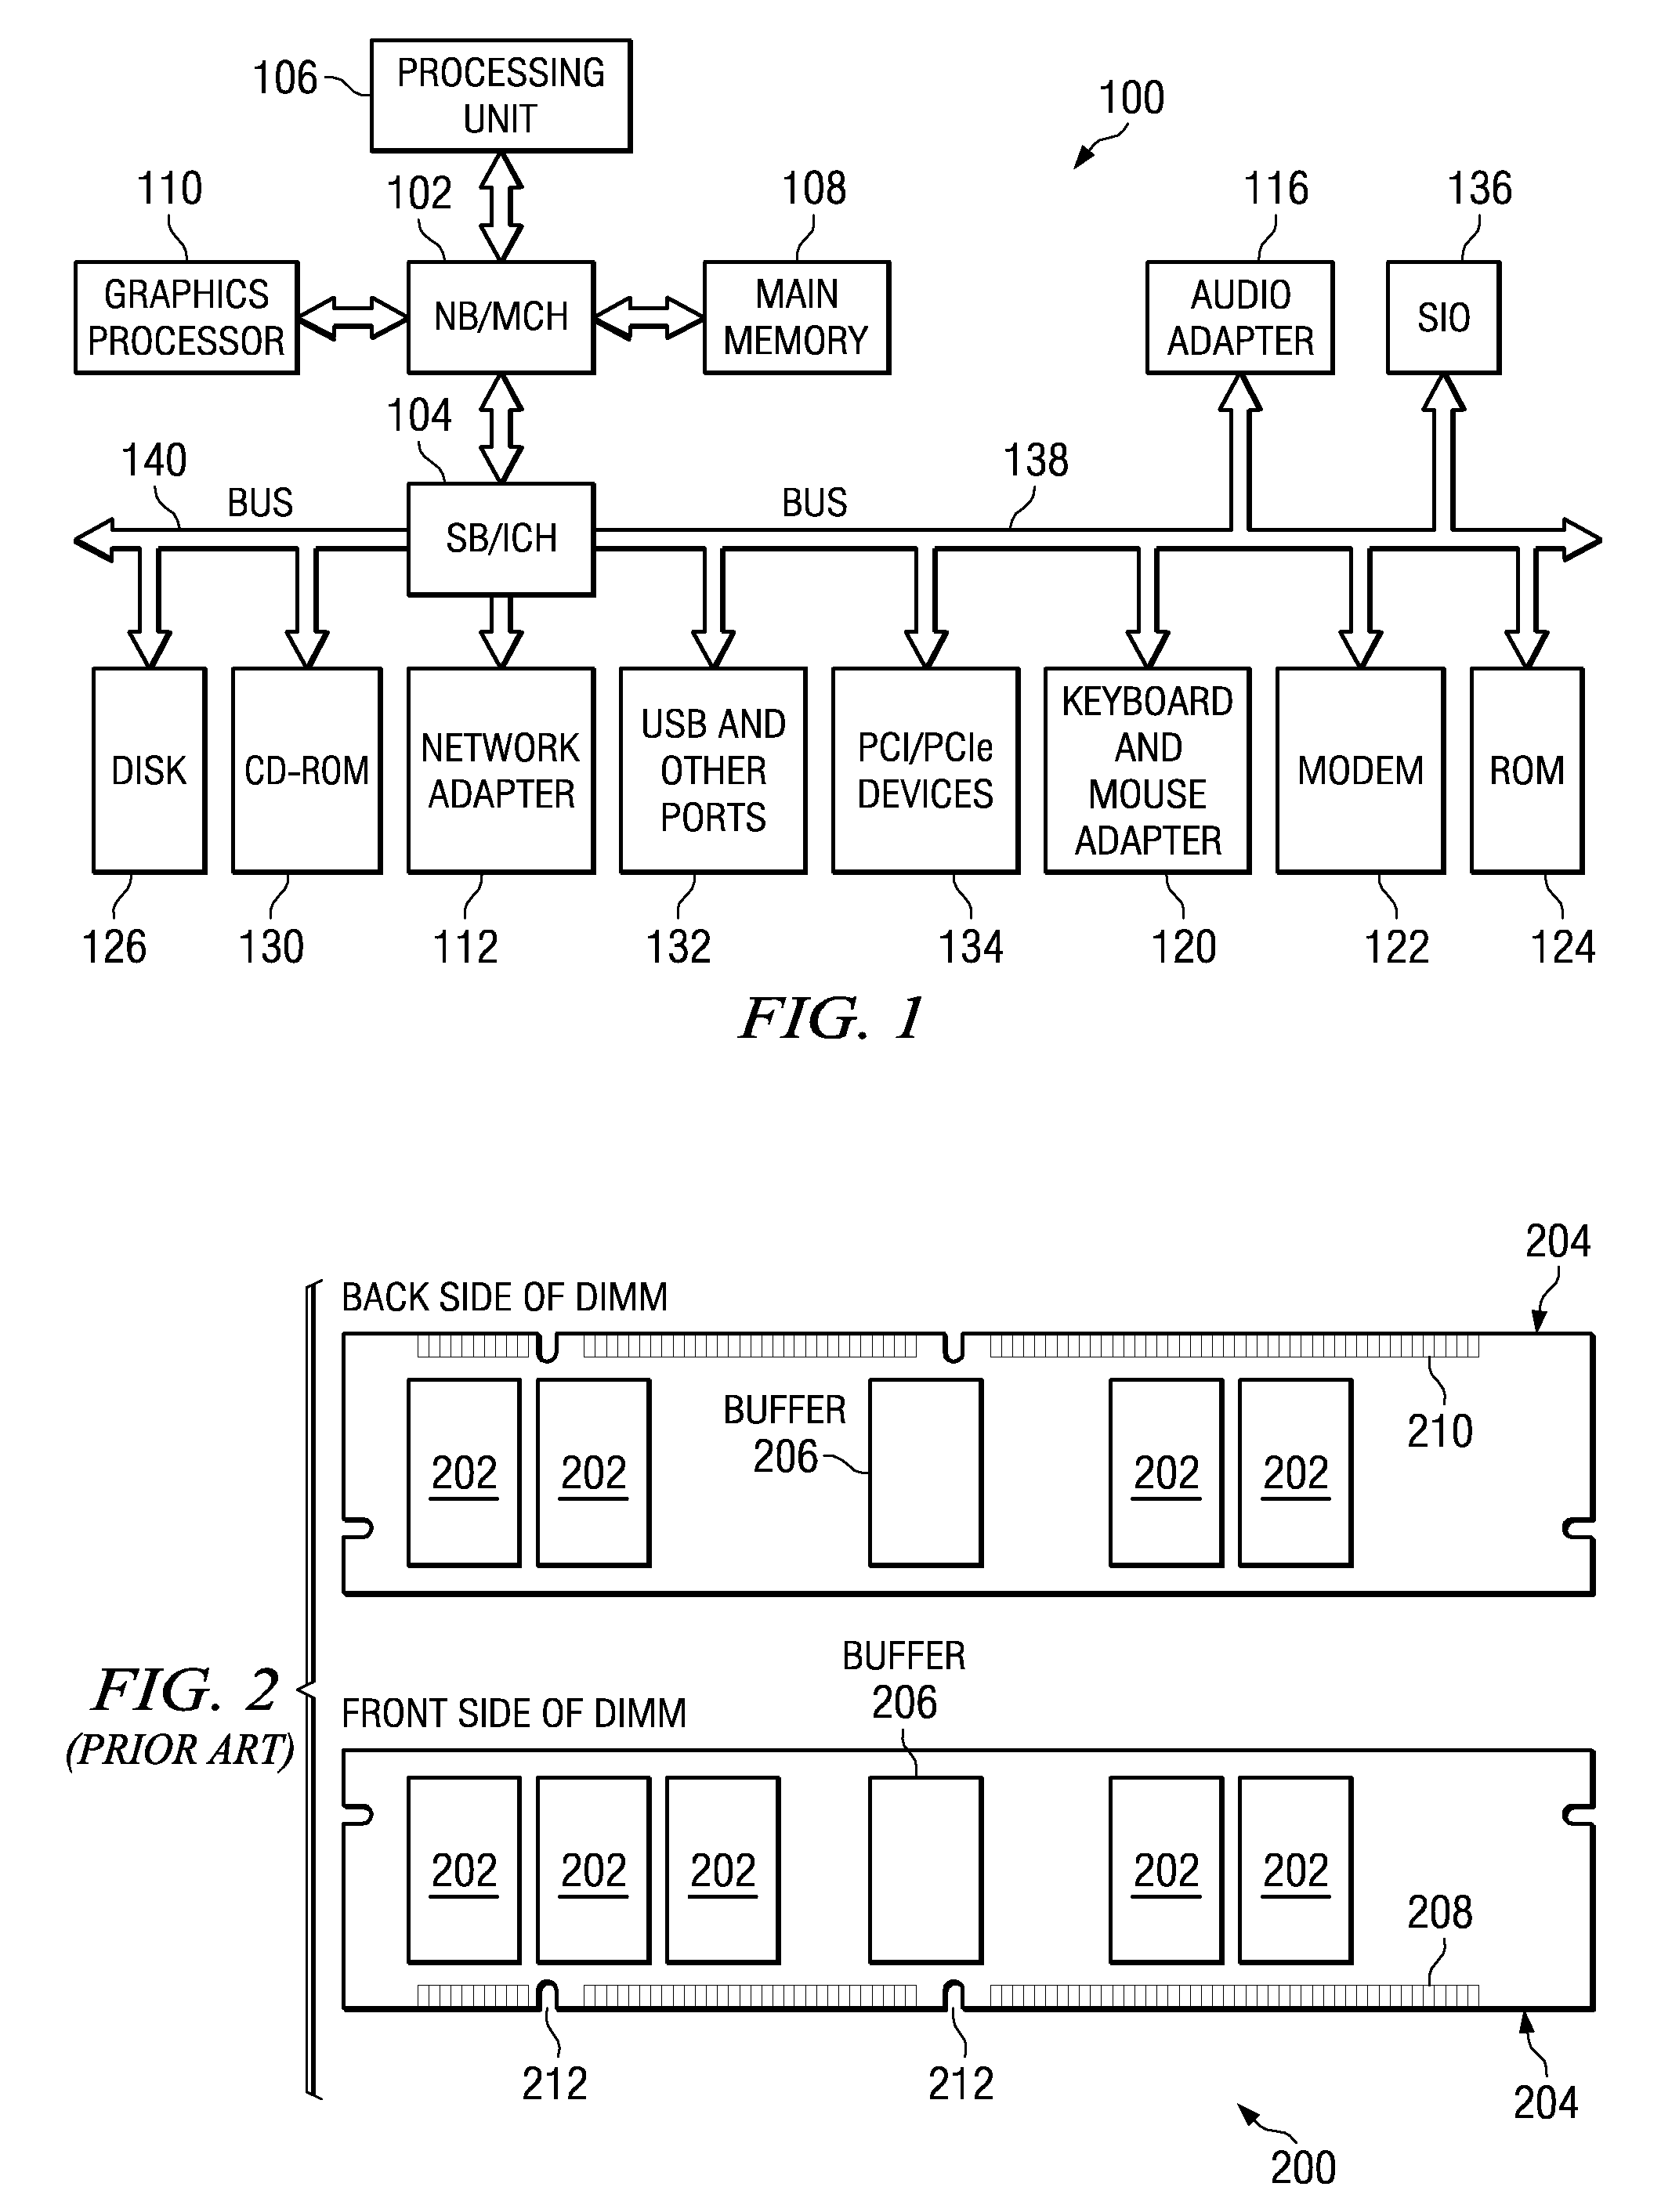 System for supporting partial cache line read operations to a memory module to reduce read data traffic on a memory channel